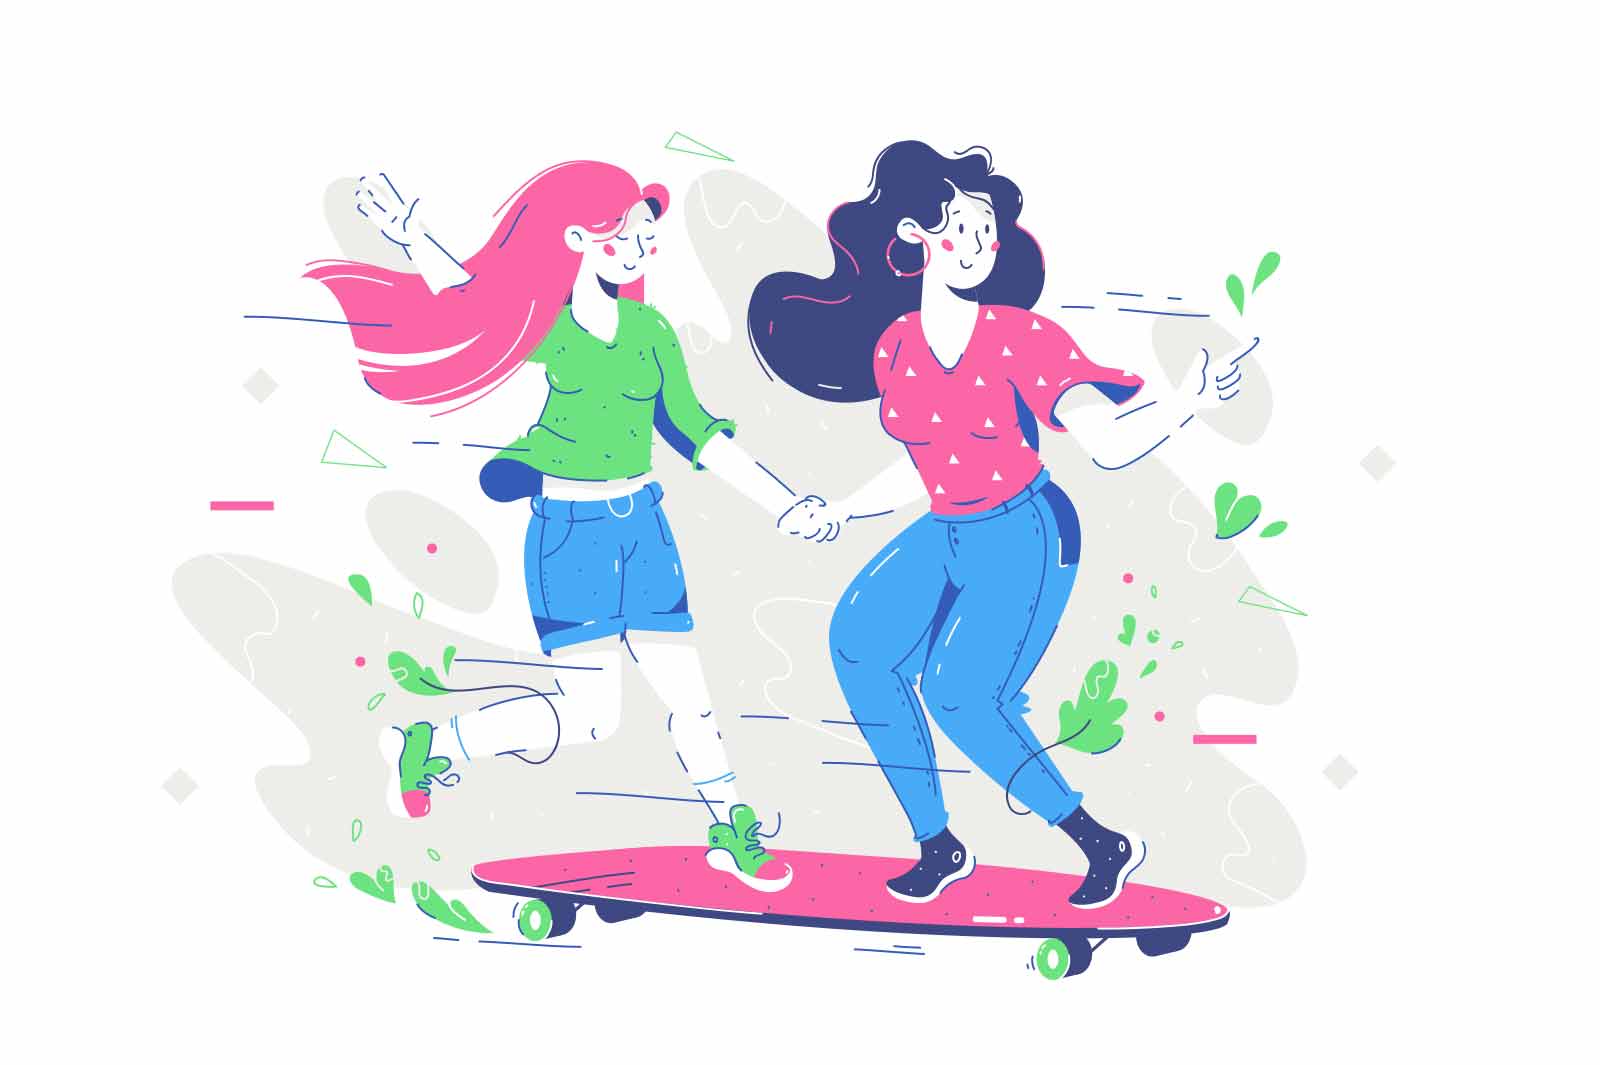 Friends riding skateboard and joy together in casual wear in the park. Happy smiling woman and girl character relaxing, good relationship concept. Vector illustration.